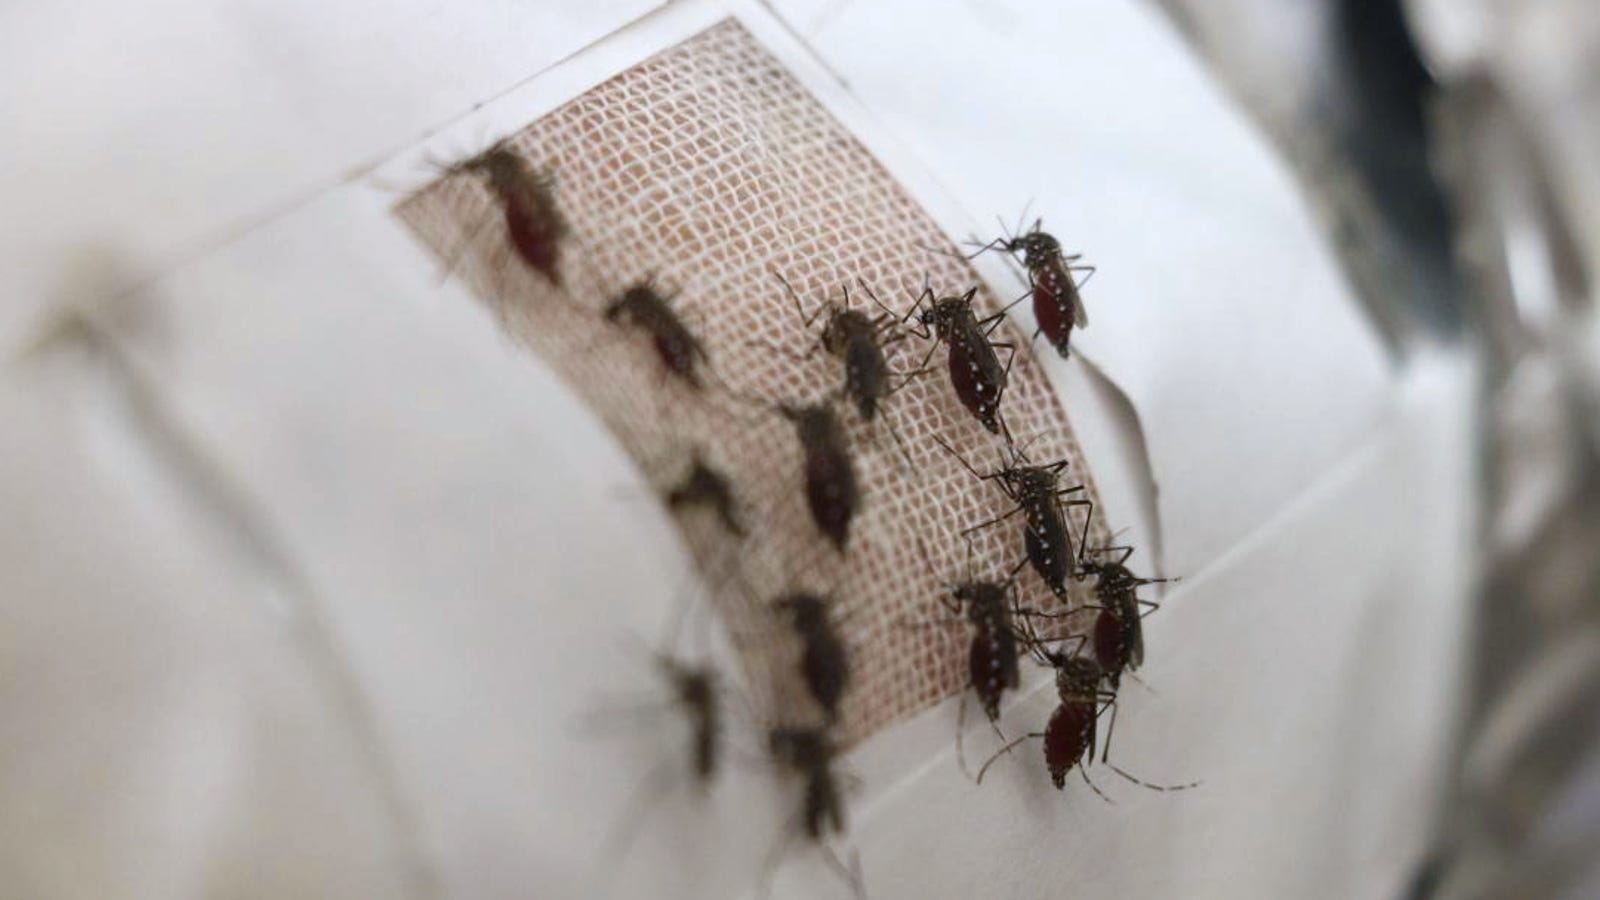 Adding Graphene to Fabrics Turns It Into a Perfect Force Field Against Mosquitoes - Gizmodo thumbnail